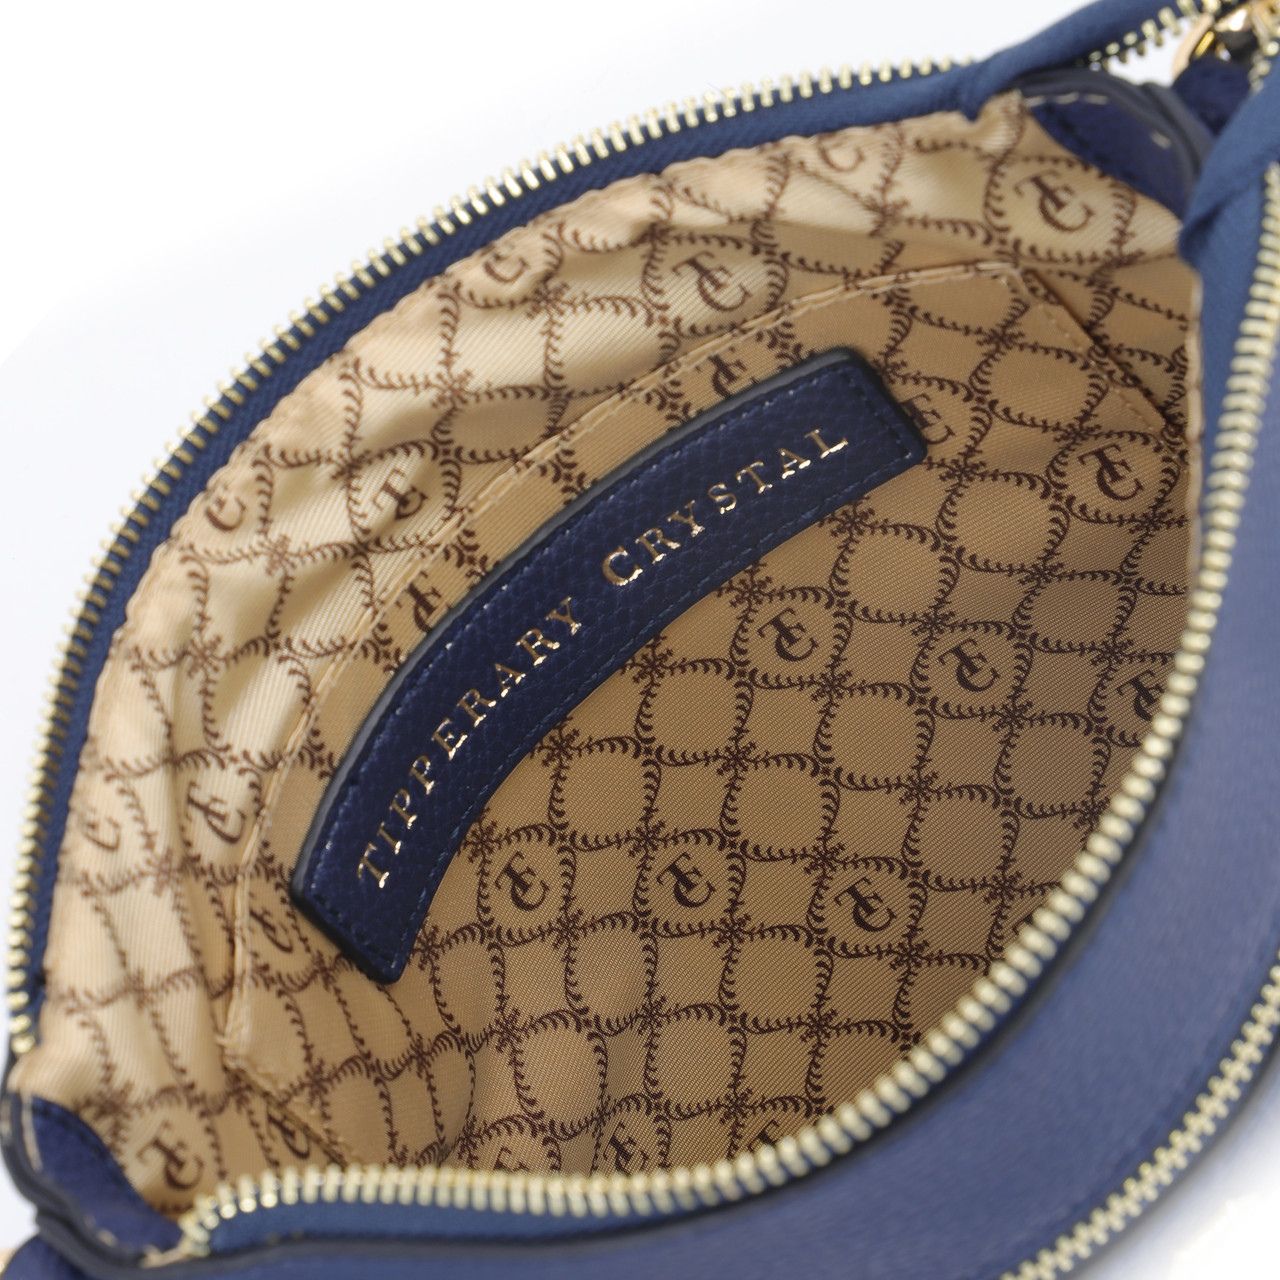 Tipperary Crystal Chelsea Cross Body Pouch - Navy New 2022  The Chelsea Cross Body Pouch Navy  - Rose gold hardware The versatile and trendy Chelsea can be worn as a cross body and also over the shoulder. The Chelsea has an adjustable strap and easily accessible outside pocket and secure front zip pocket. Metal hardware detail finish off this stylish bag in rose gold or yellow gold.